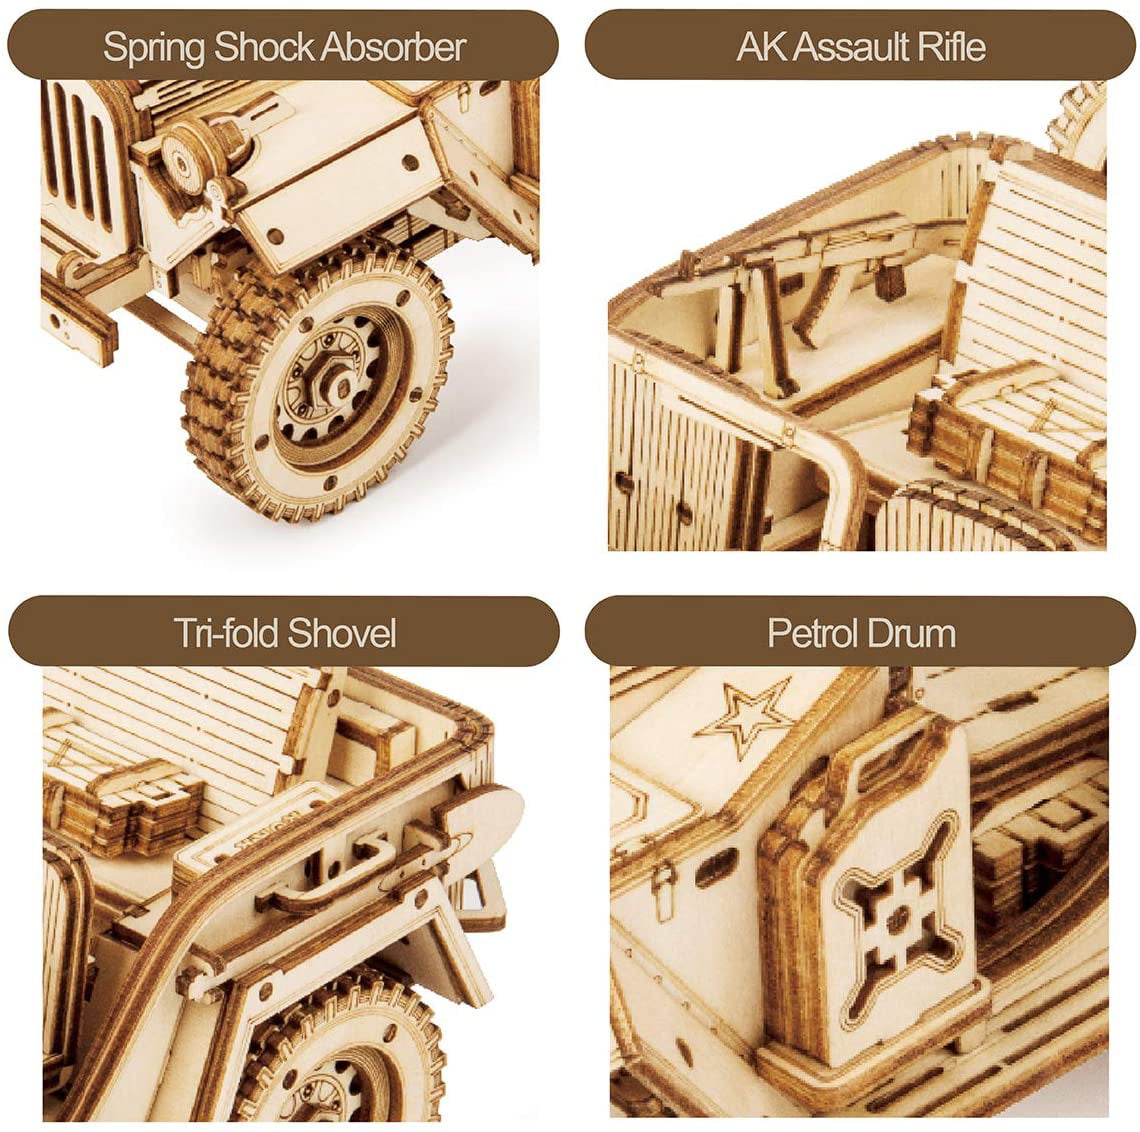  ROKR 3D Wooden Puzzle for Adults-Mechanical Train Model  Kits-Brain Teaser Puzzles-Vehicle Building Kits-Unique Gift for Kids on  Birthday/Christmas Day(1:80 Scale)(MC501-Prime Steam Express) : Toys & Games